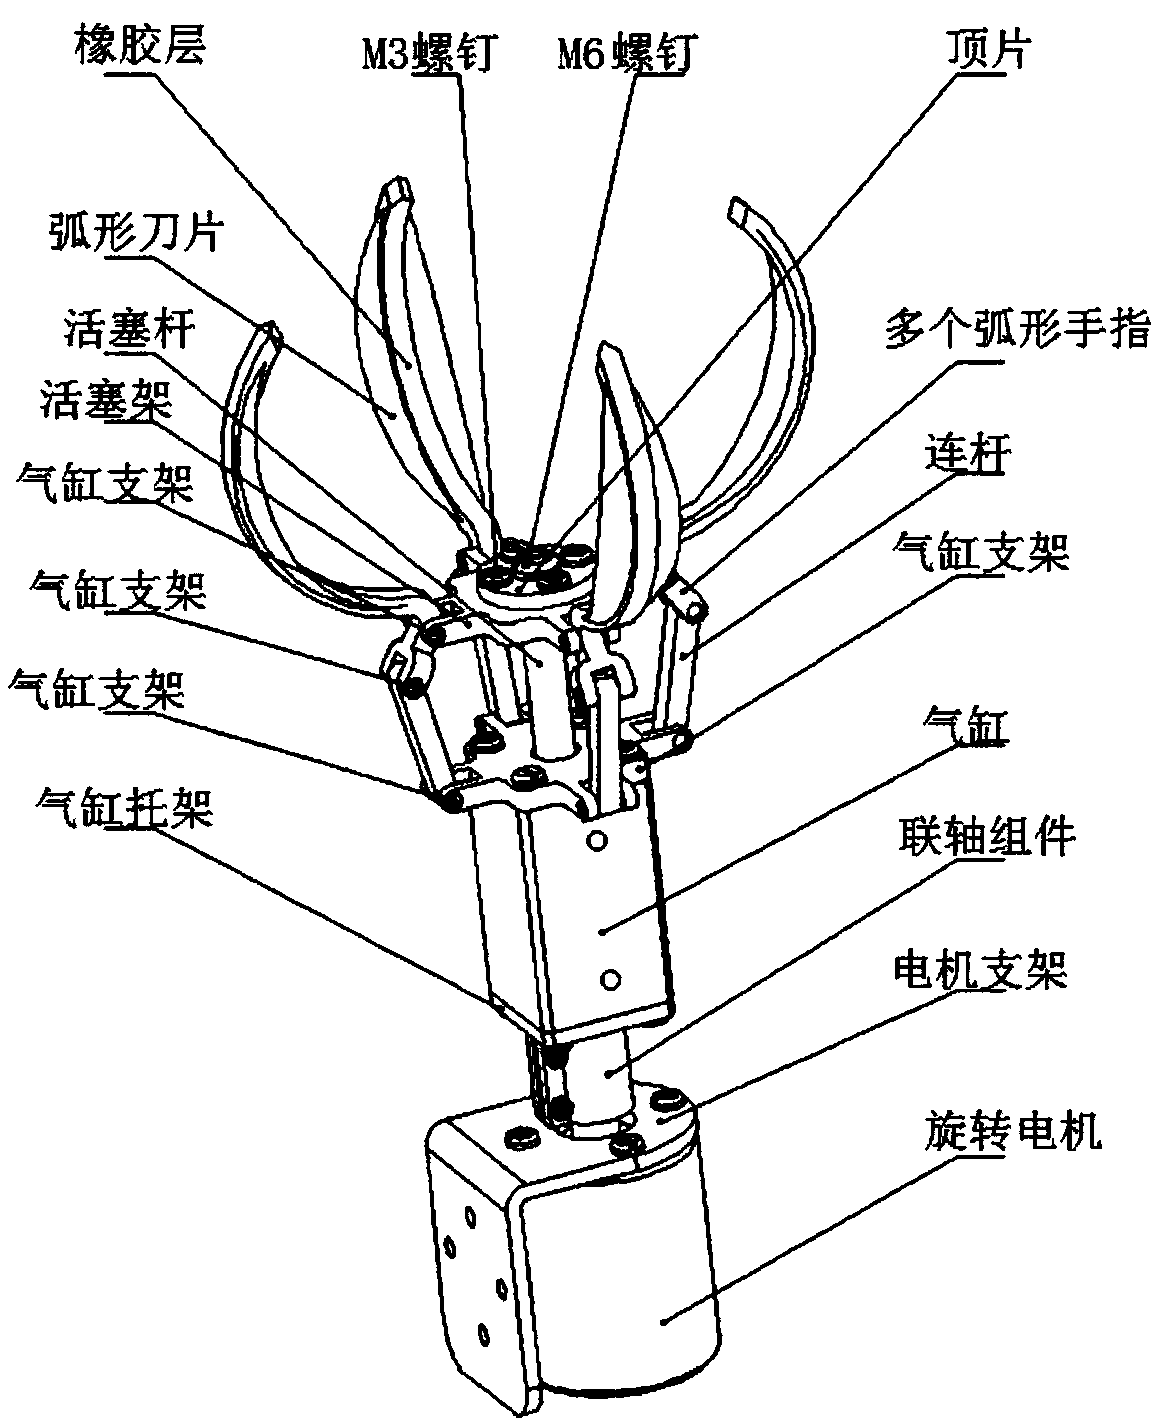 Tail end executor of fragrant pear picking robot, and picking method